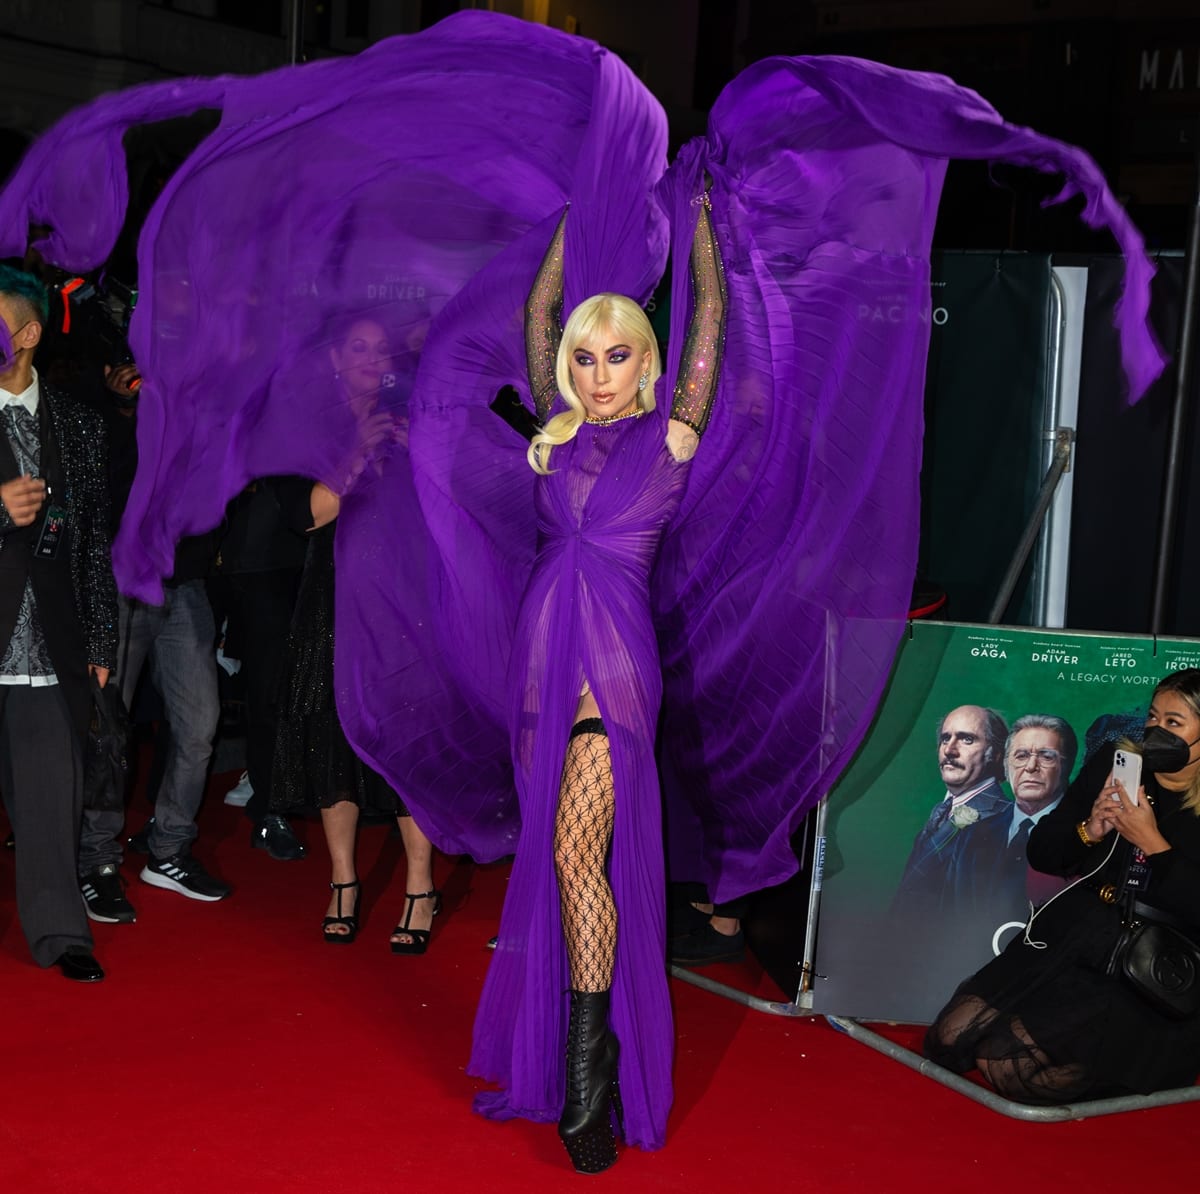 Lady Gaga wears a purple gown at the premiere of her new movie House of Gucci